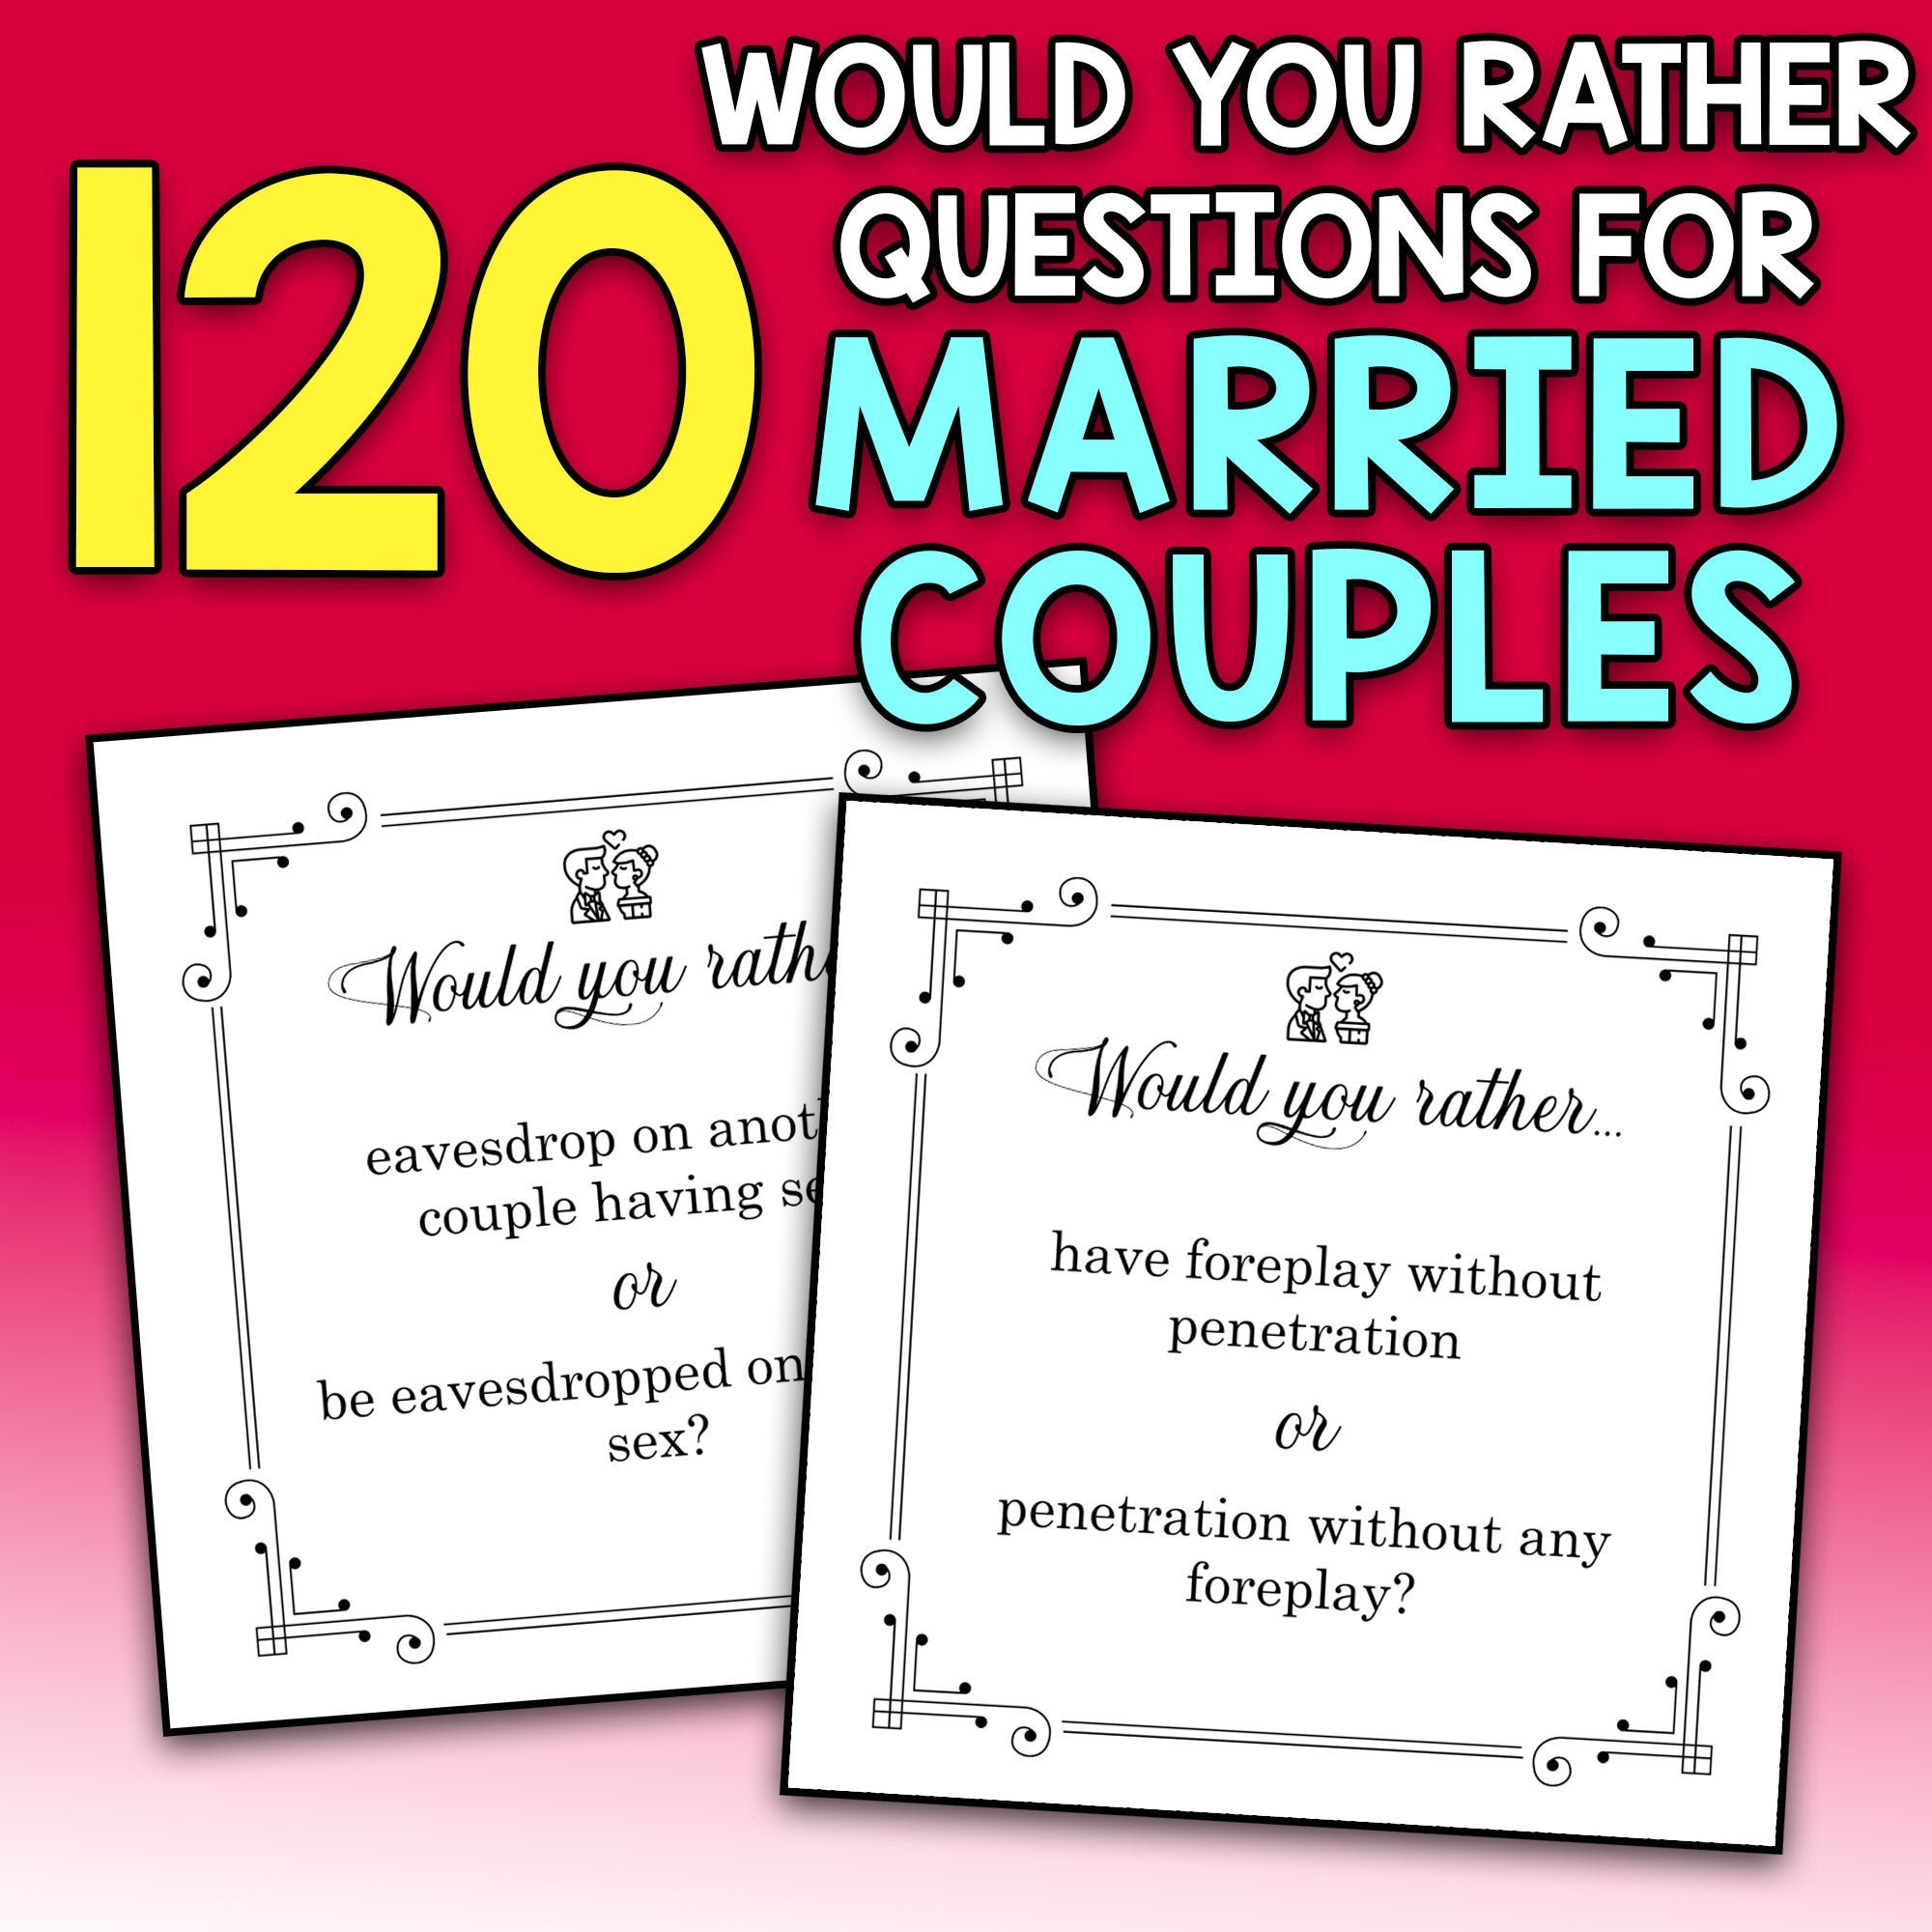 BEST VALUE 120 Would You Rather Questions for Married Couples image